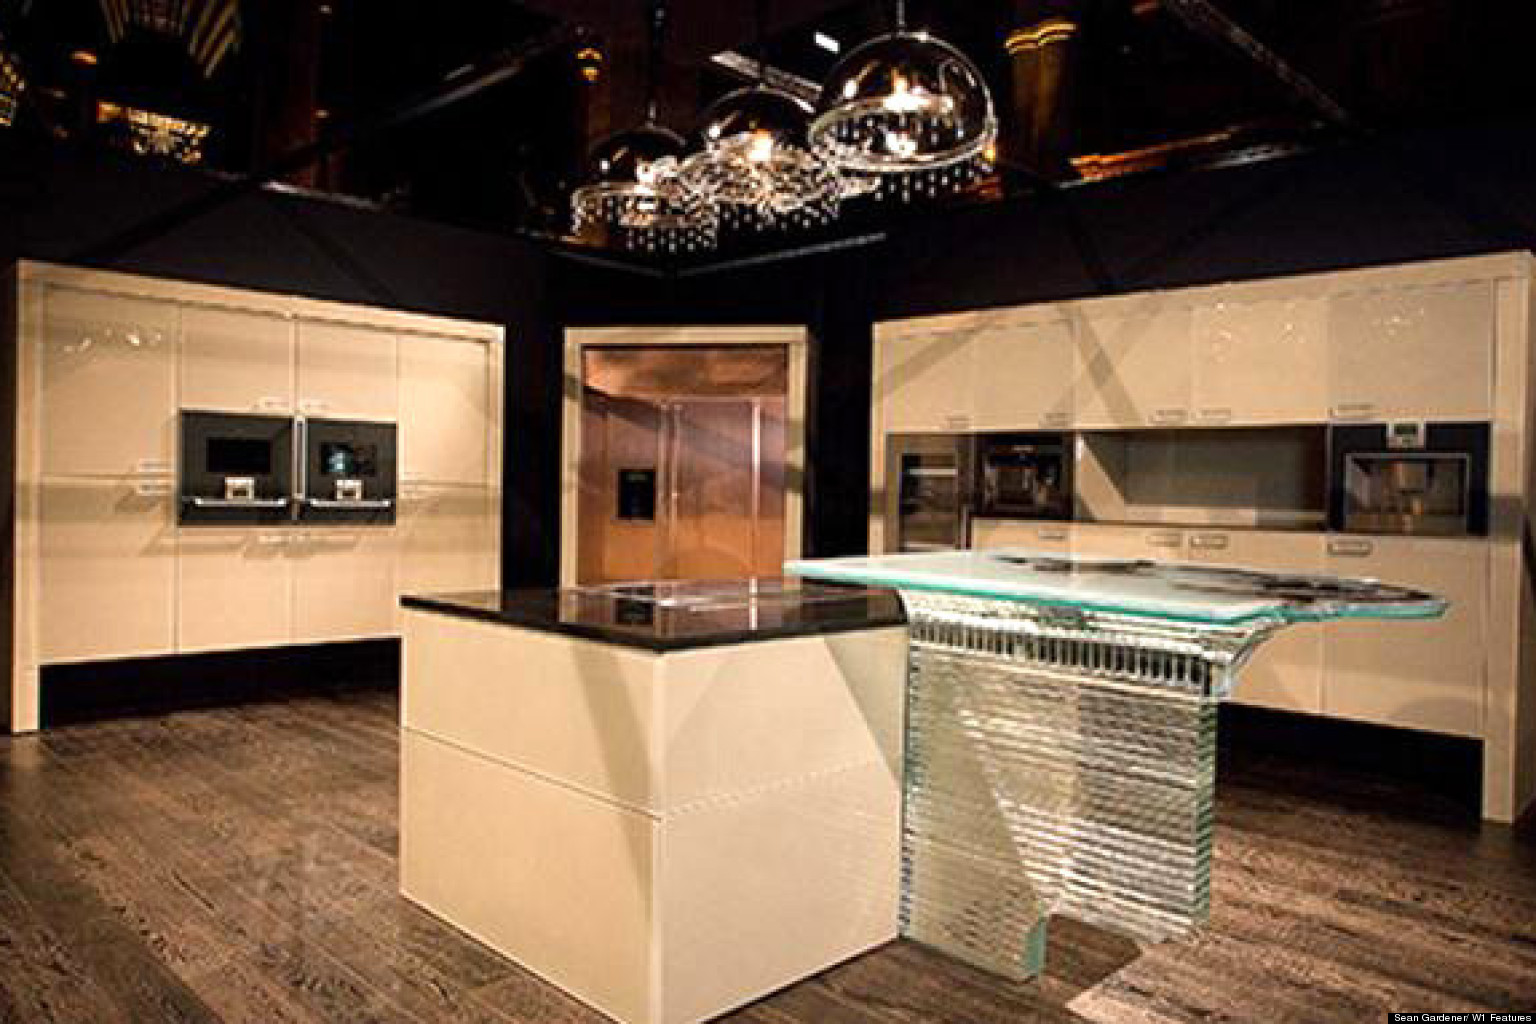 The Most Expensive Kitchen Costs $1.6 Million (PHOTO)